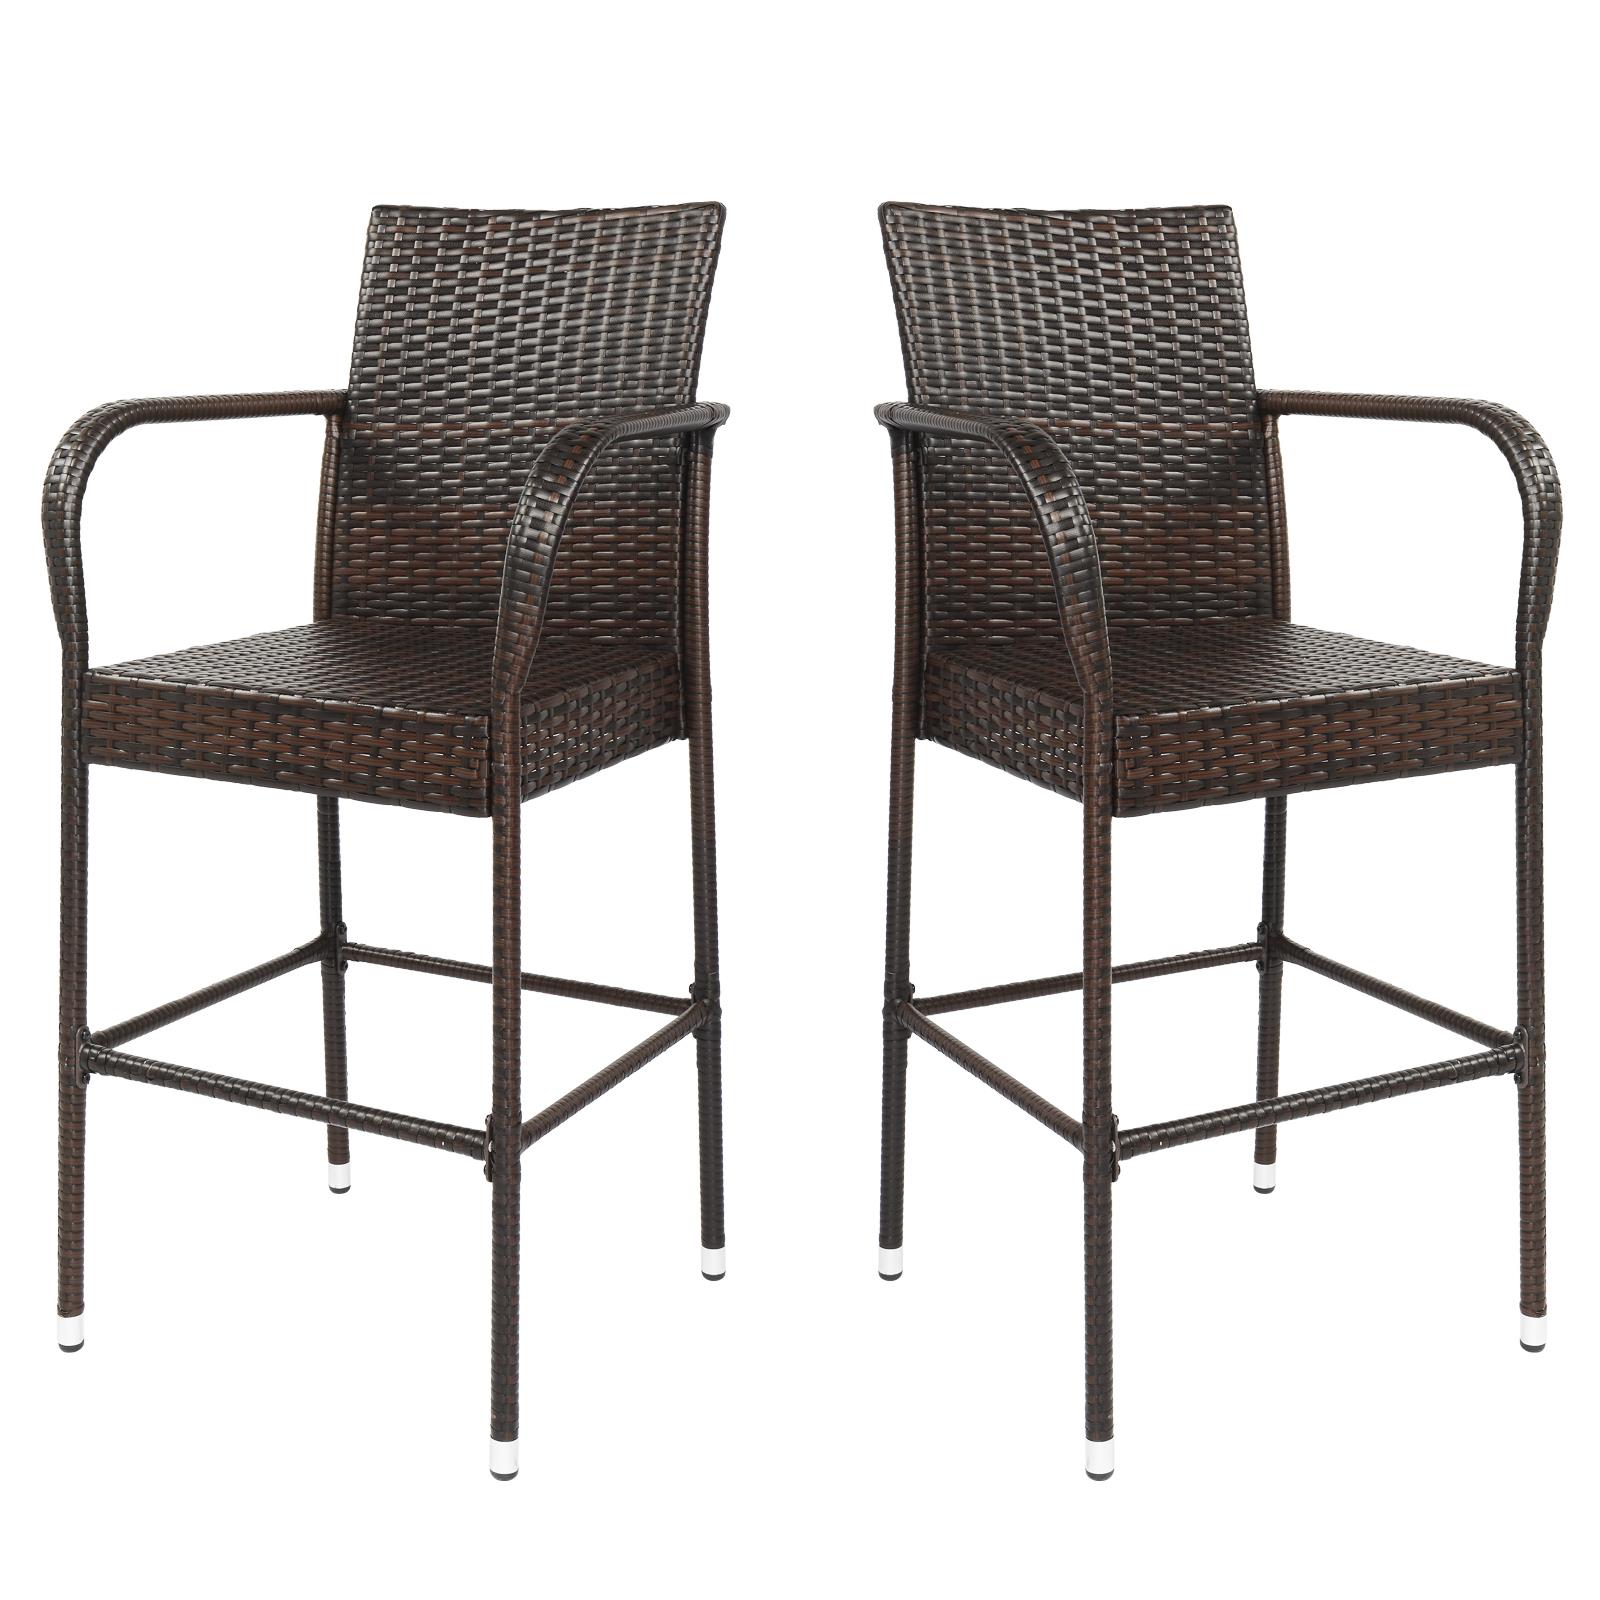 SamyoHome Wicker Bar Stools Outdoor Set of 2, Outdoor Bar Chairs - image 3 of 11